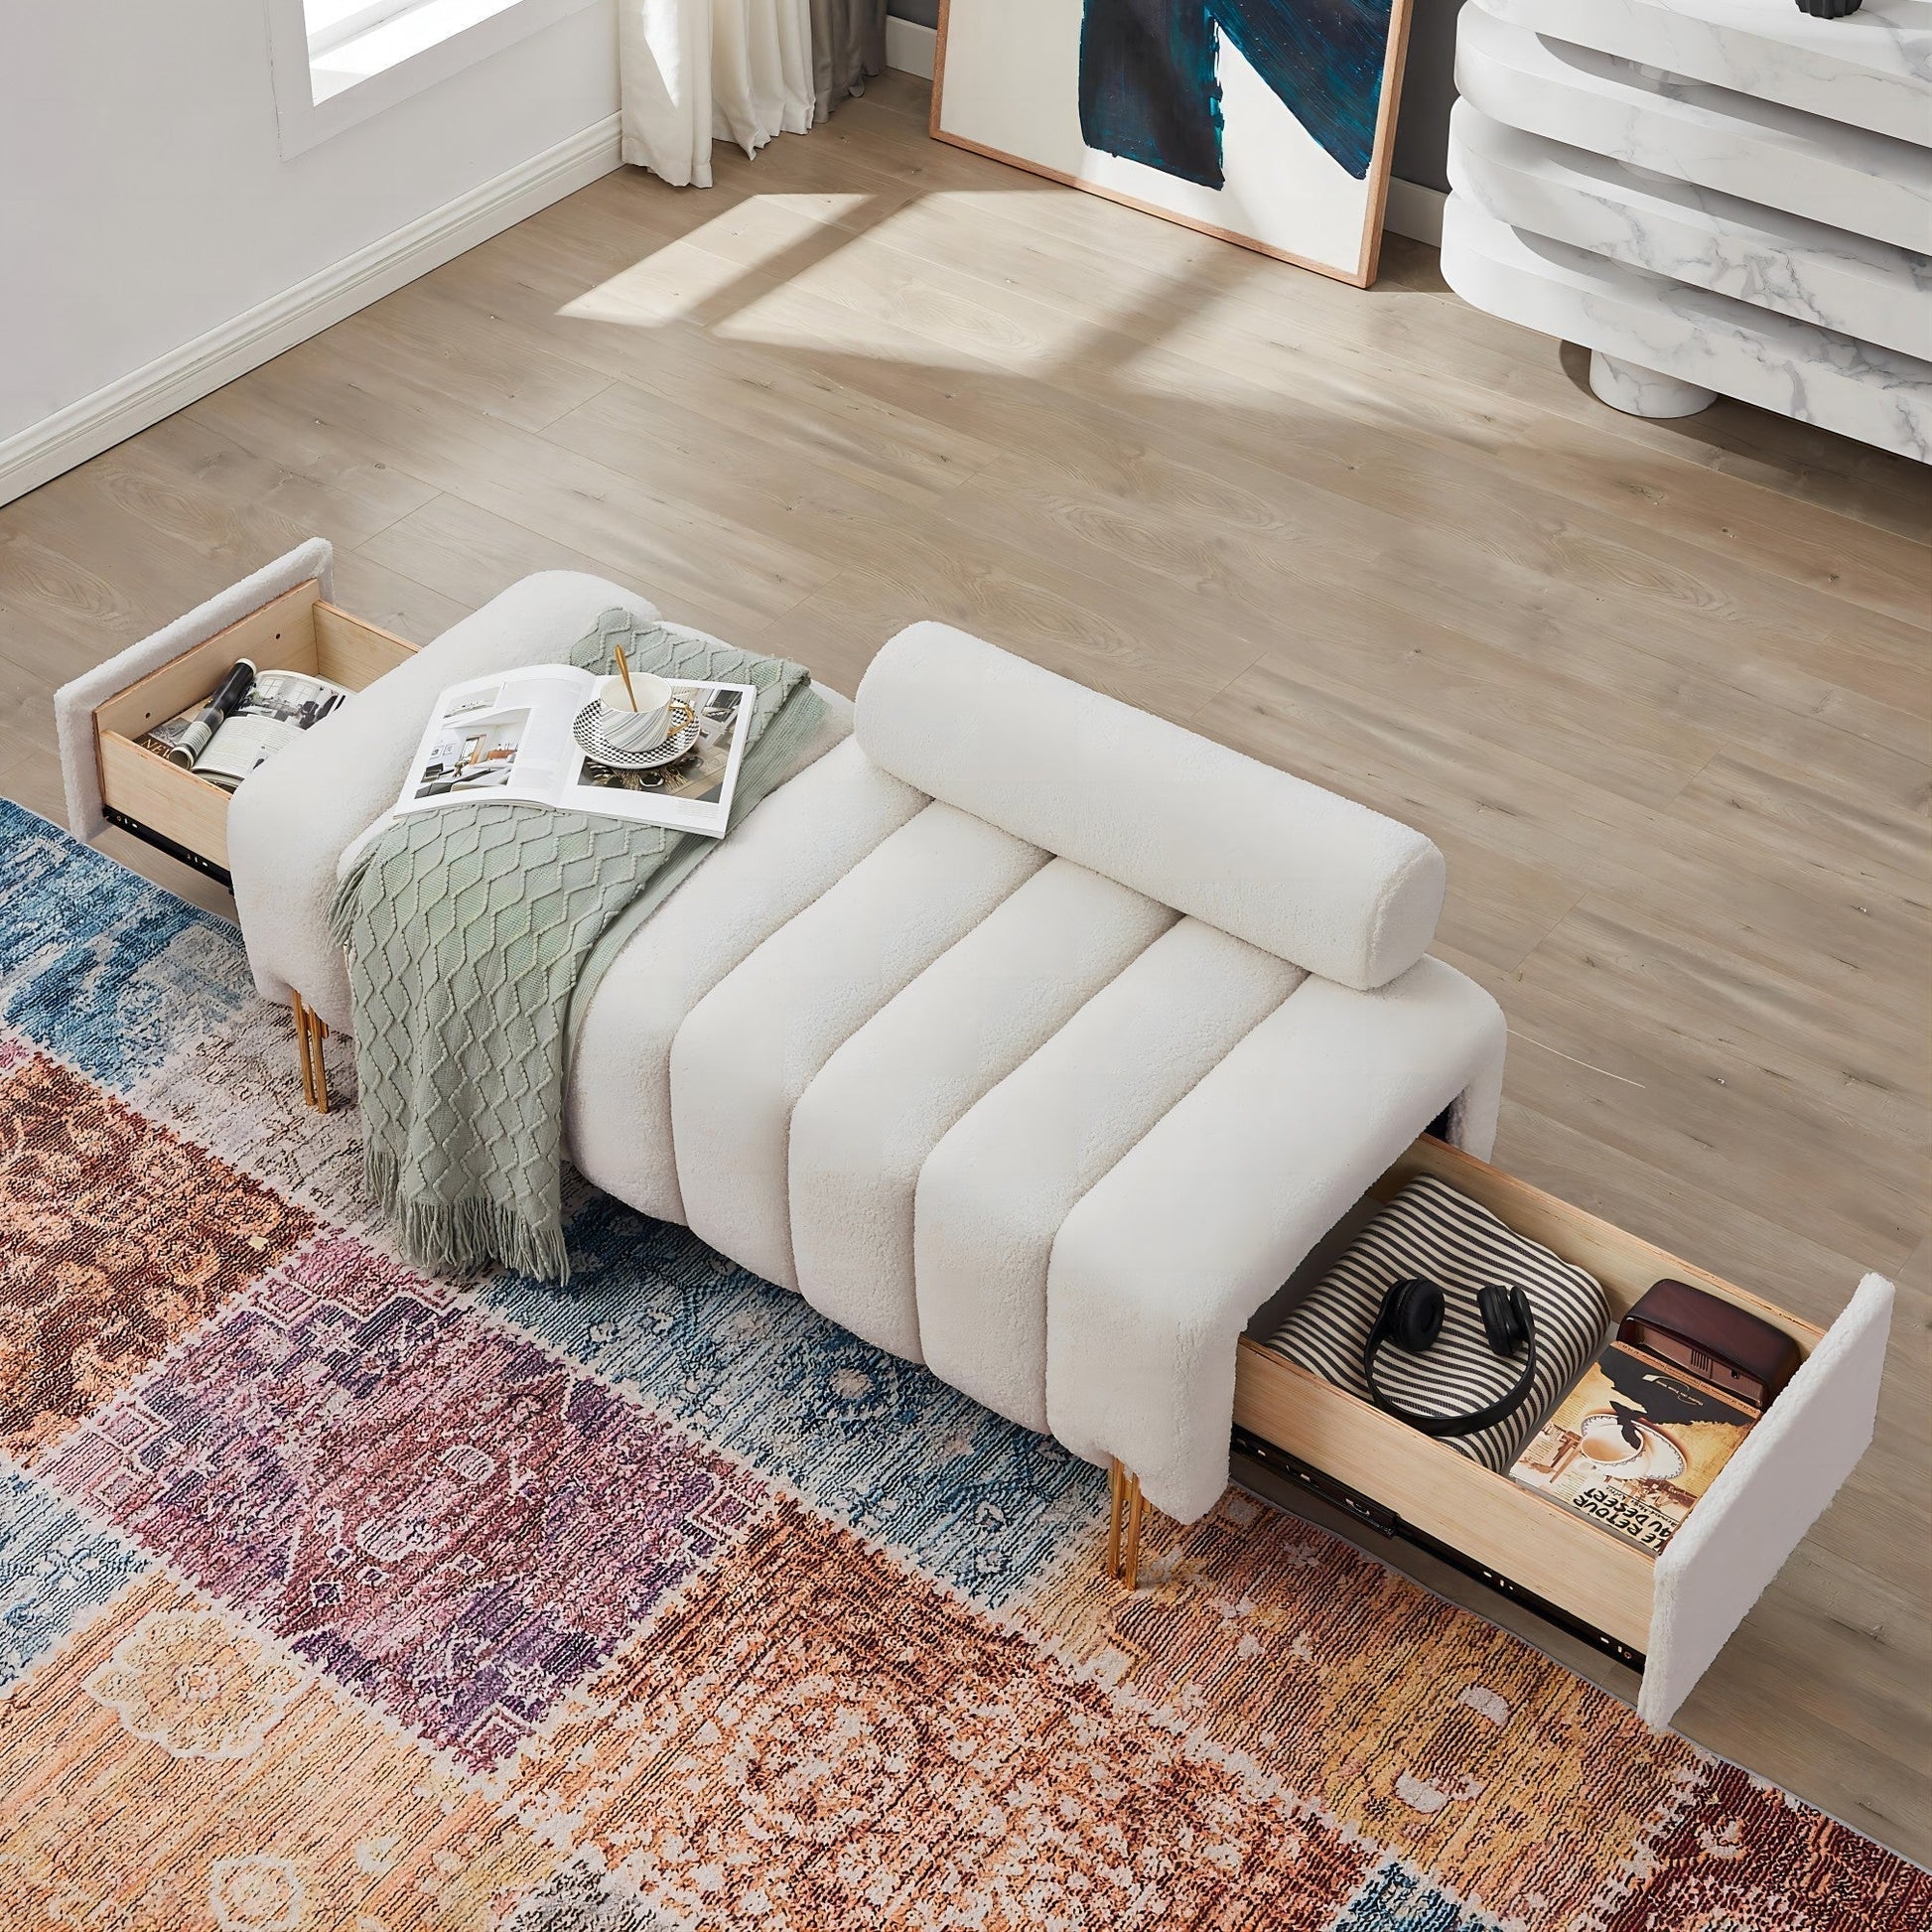 New design pull-out storage compartment footstool sofa.